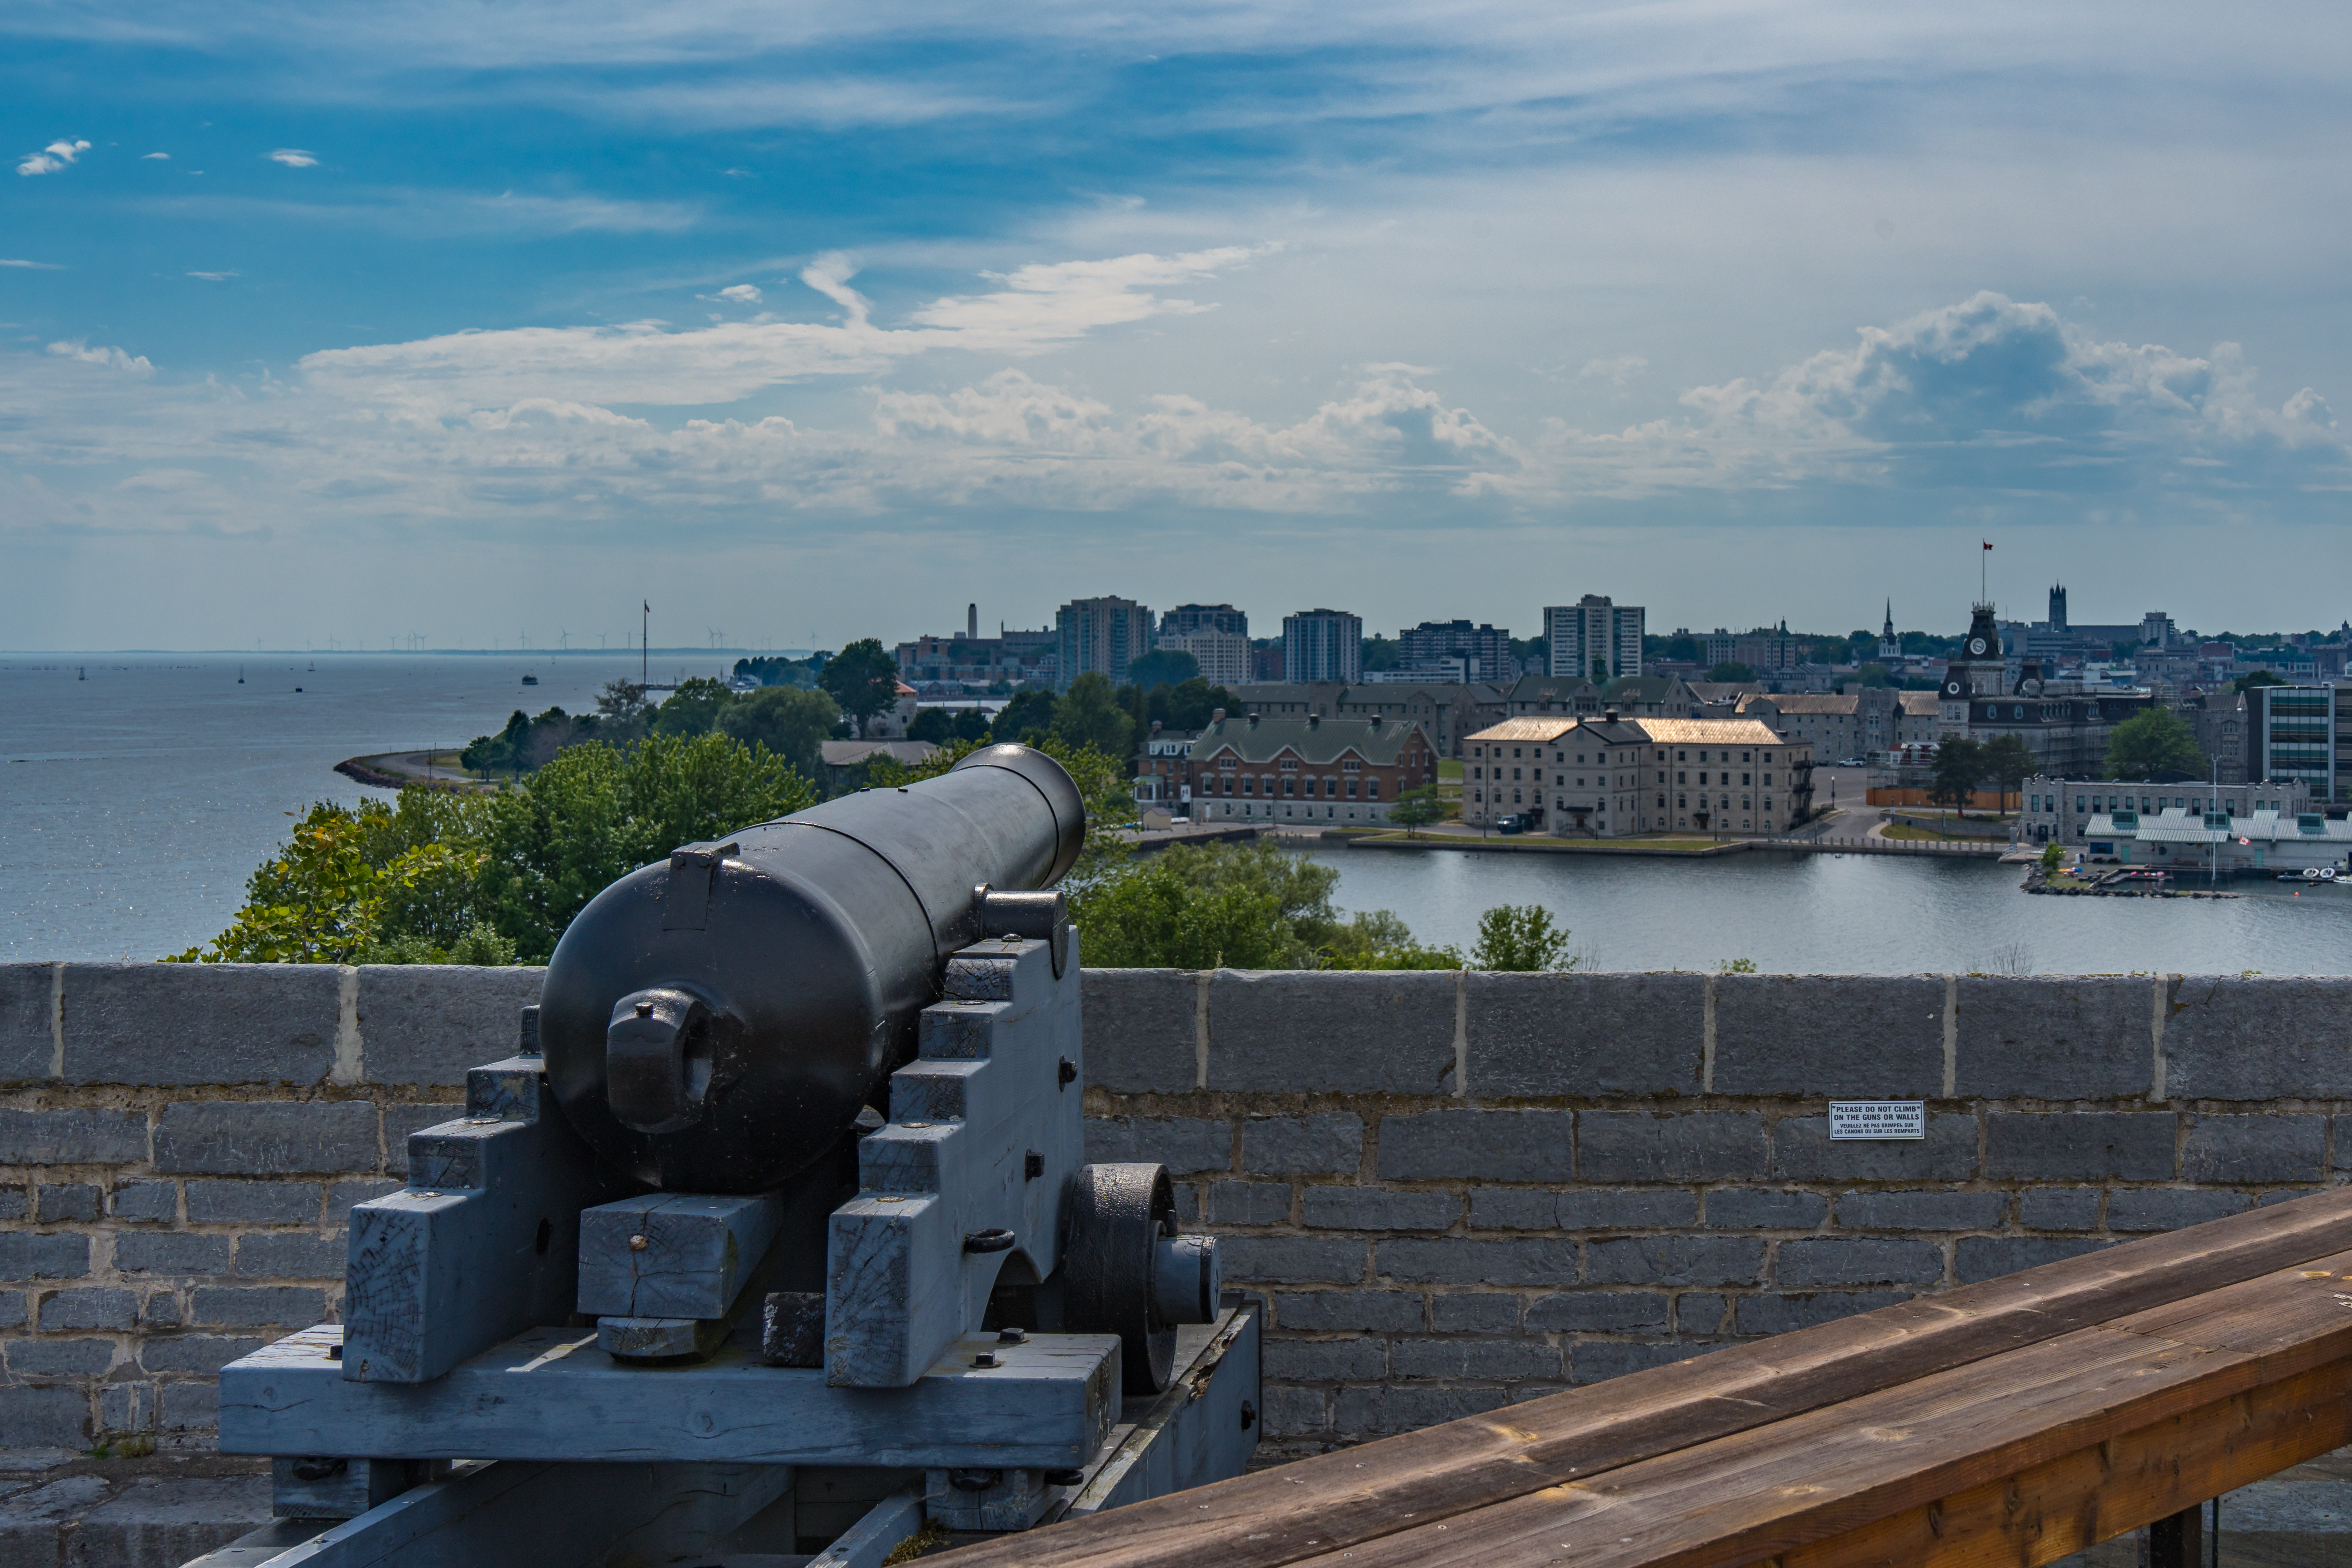 A view of a cannon at Fort Henry overlooking the city of Kingston